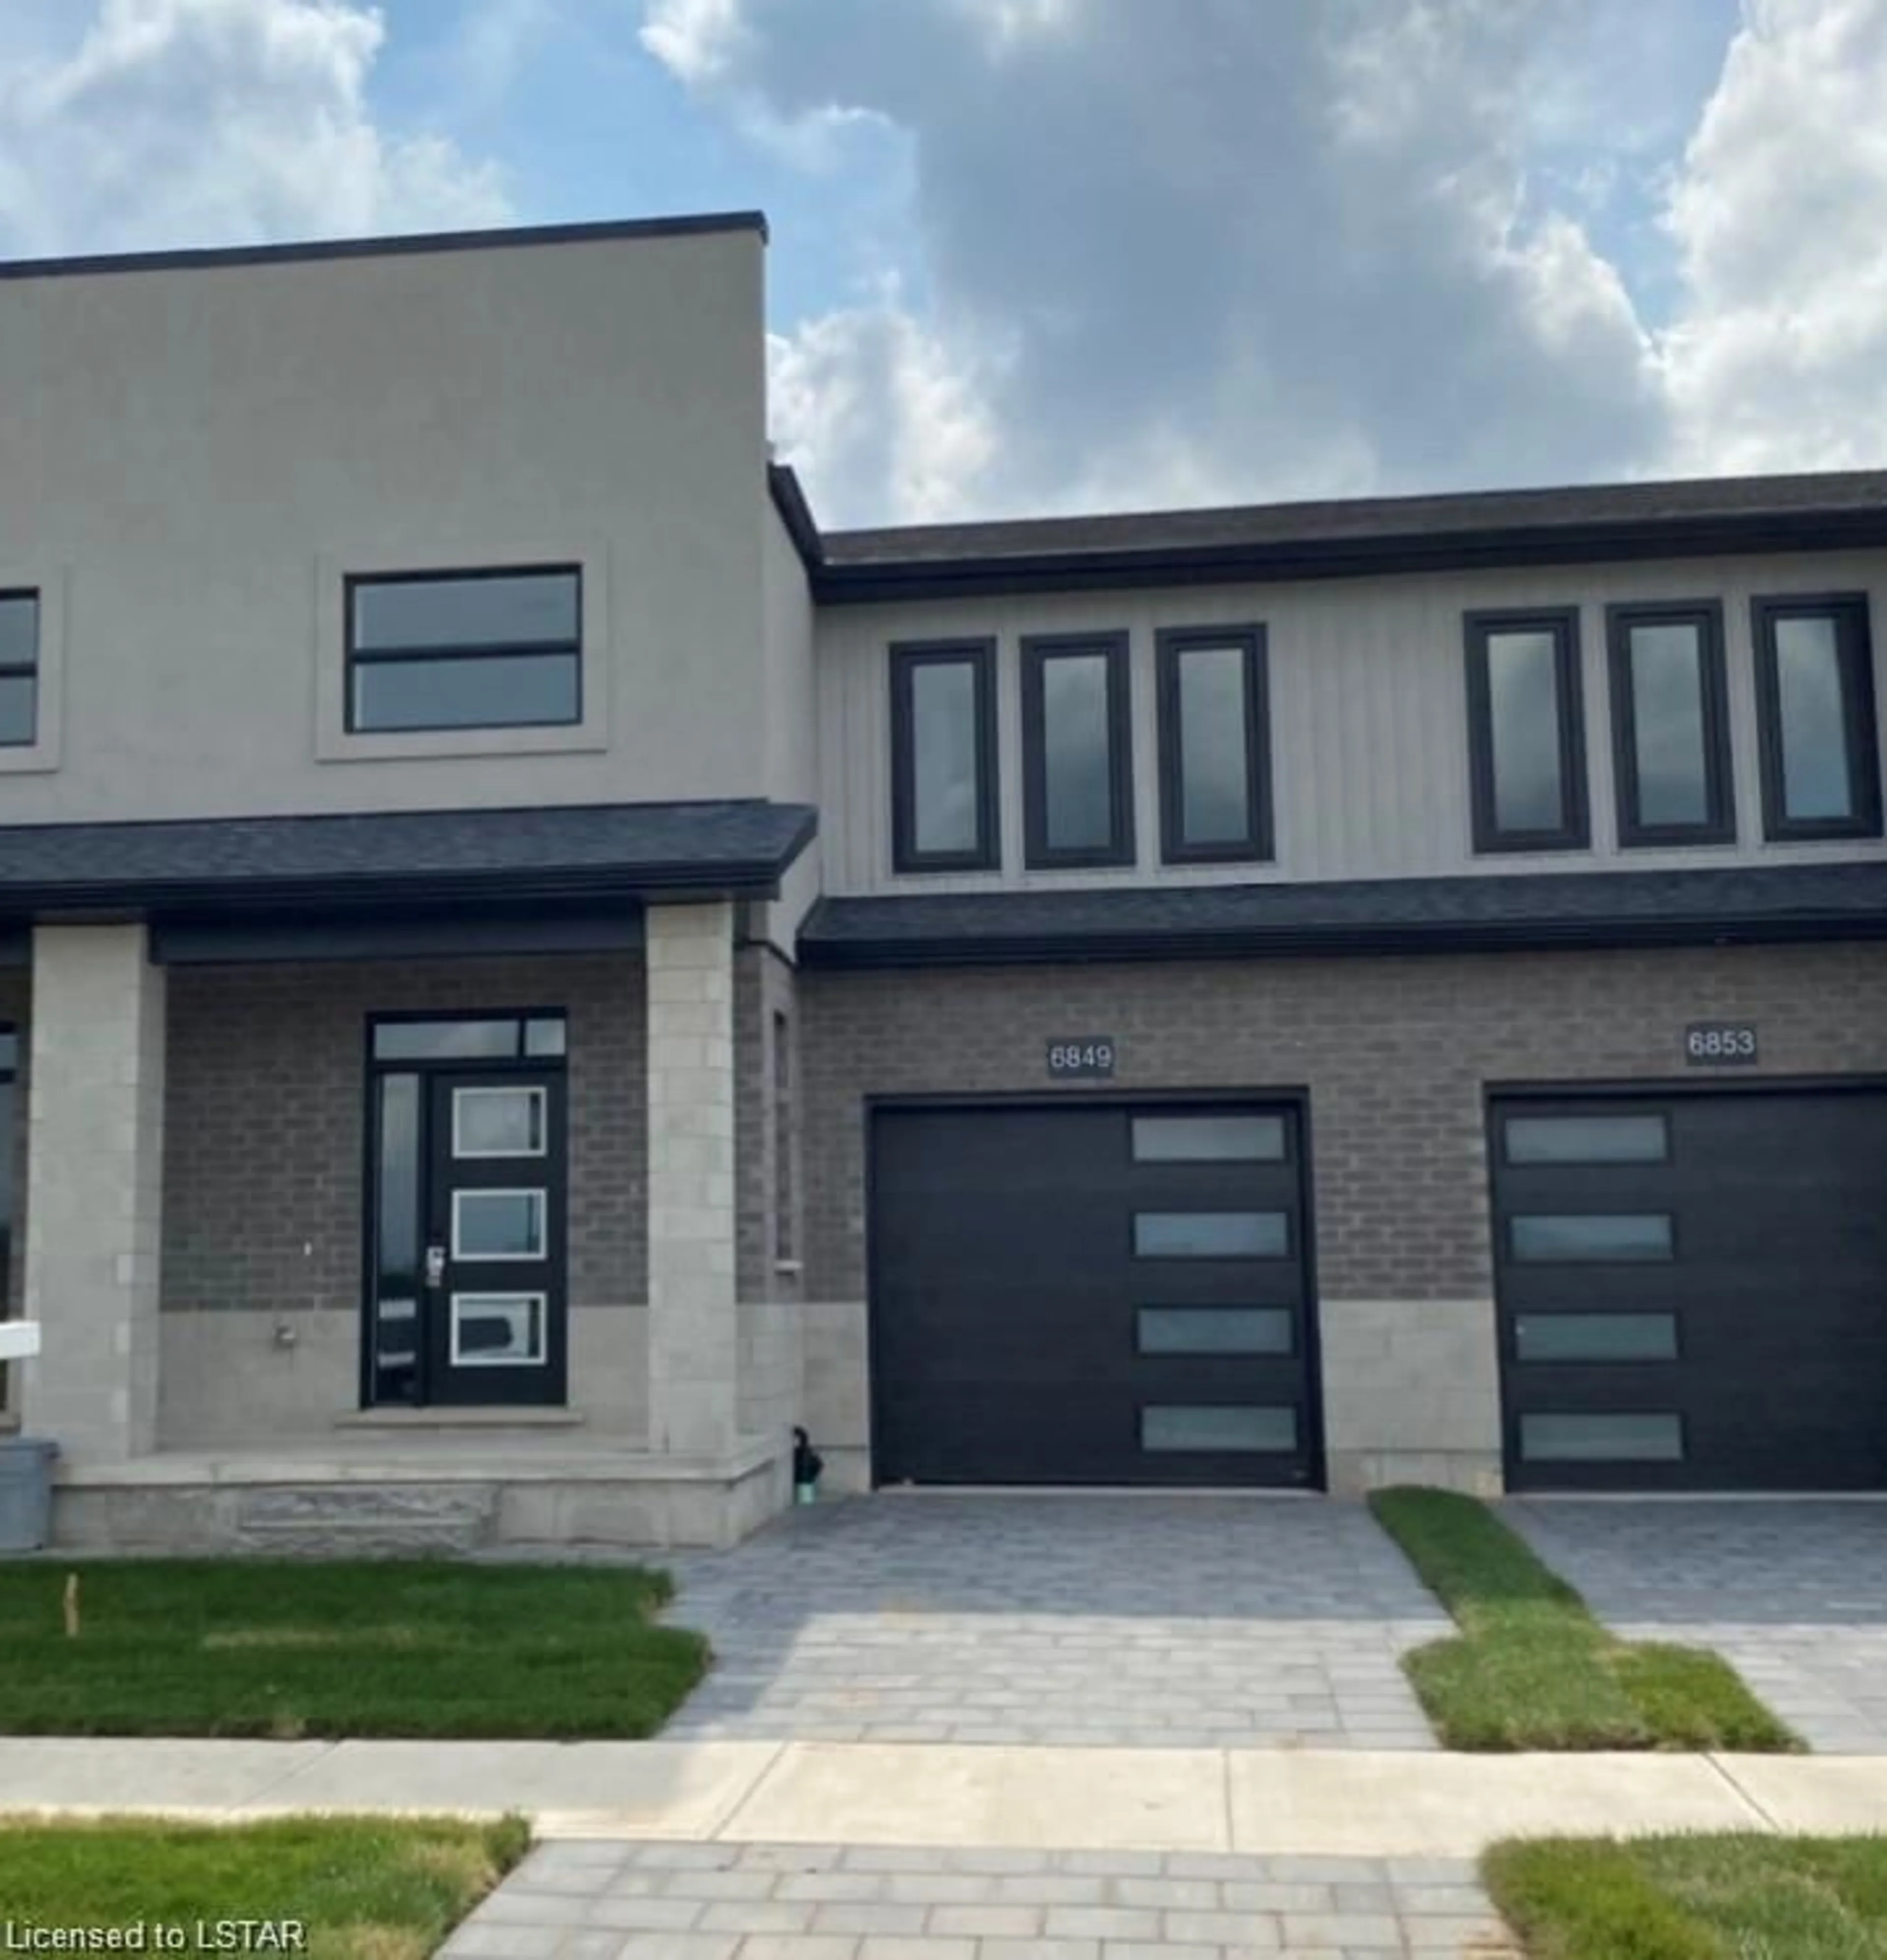 Home with brick exterior material for 6849 Royal Magnolia Ave, London Ontario N6P 1H5